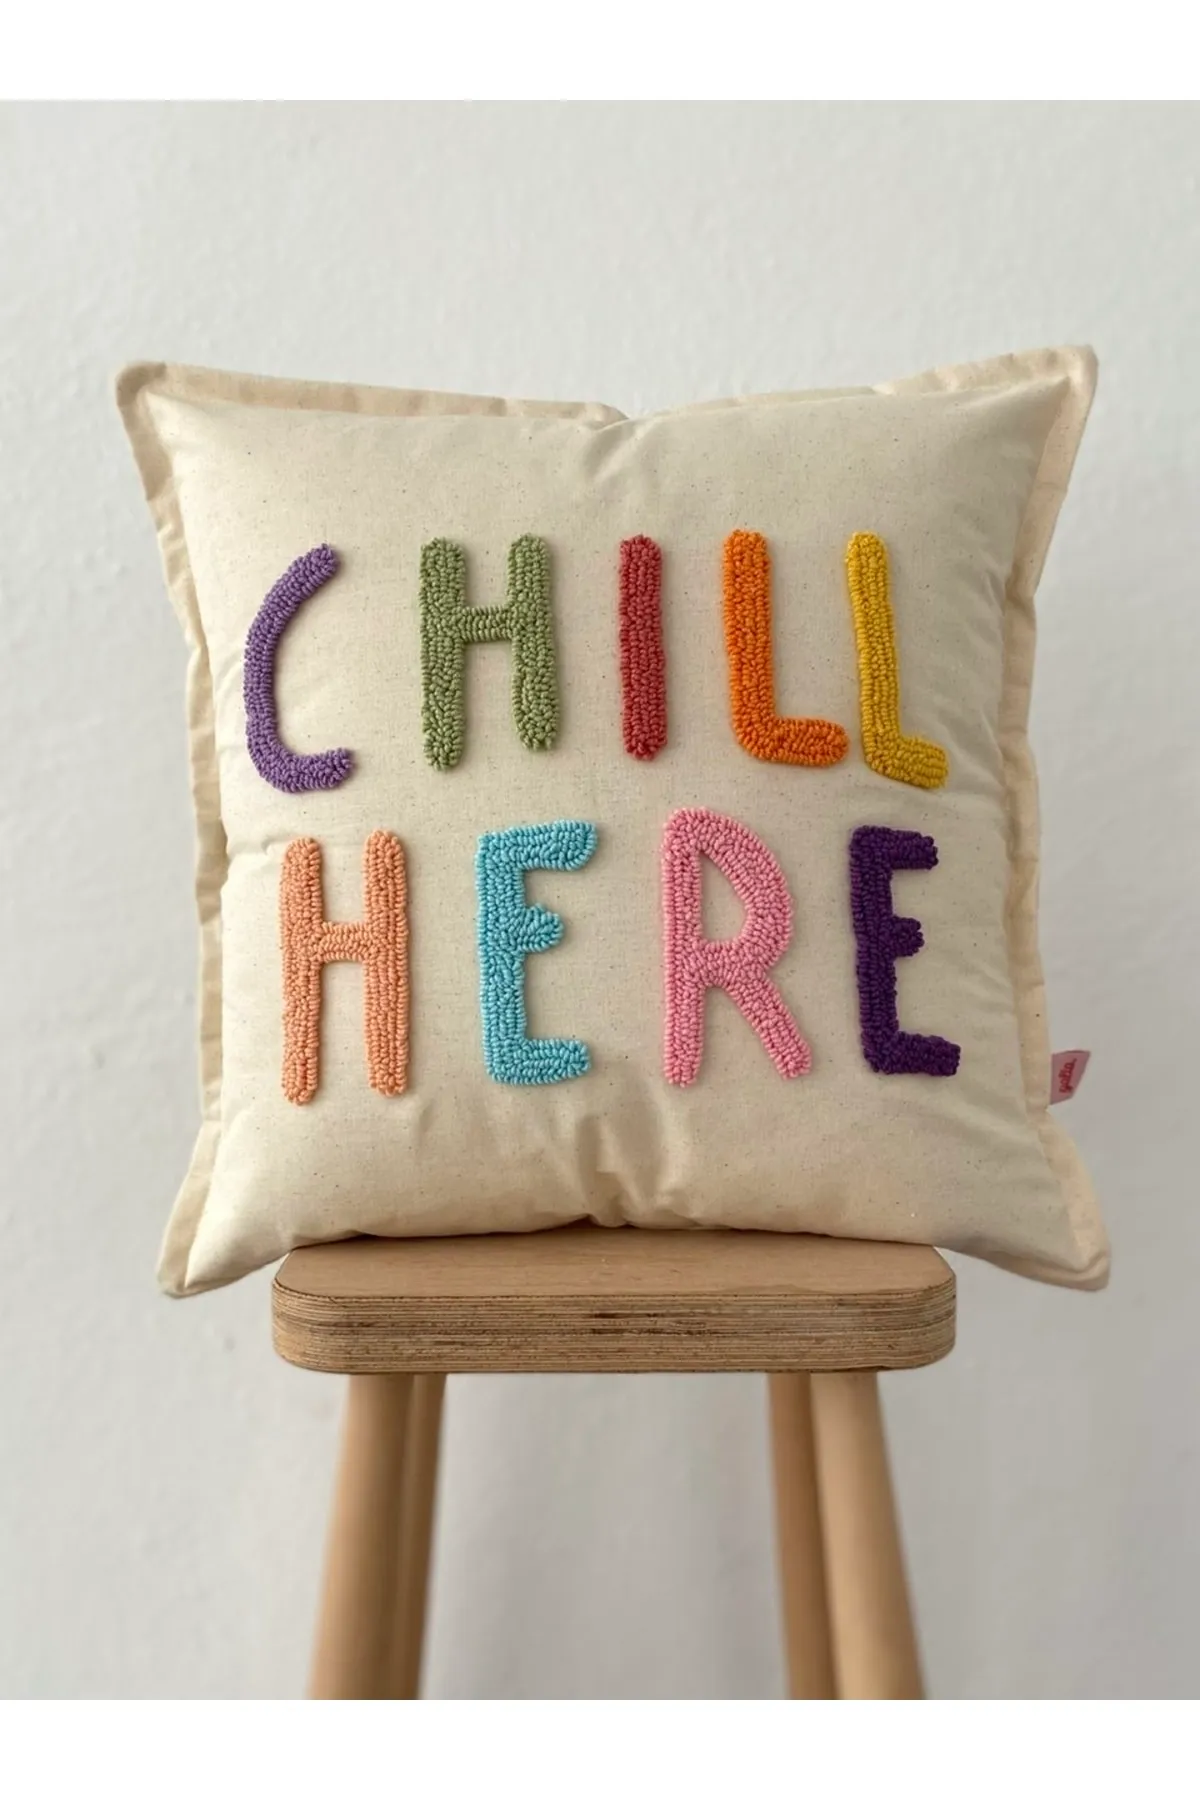 Chill Here Colorful Motto Washed Linen Punch Cushion Pillow Cover